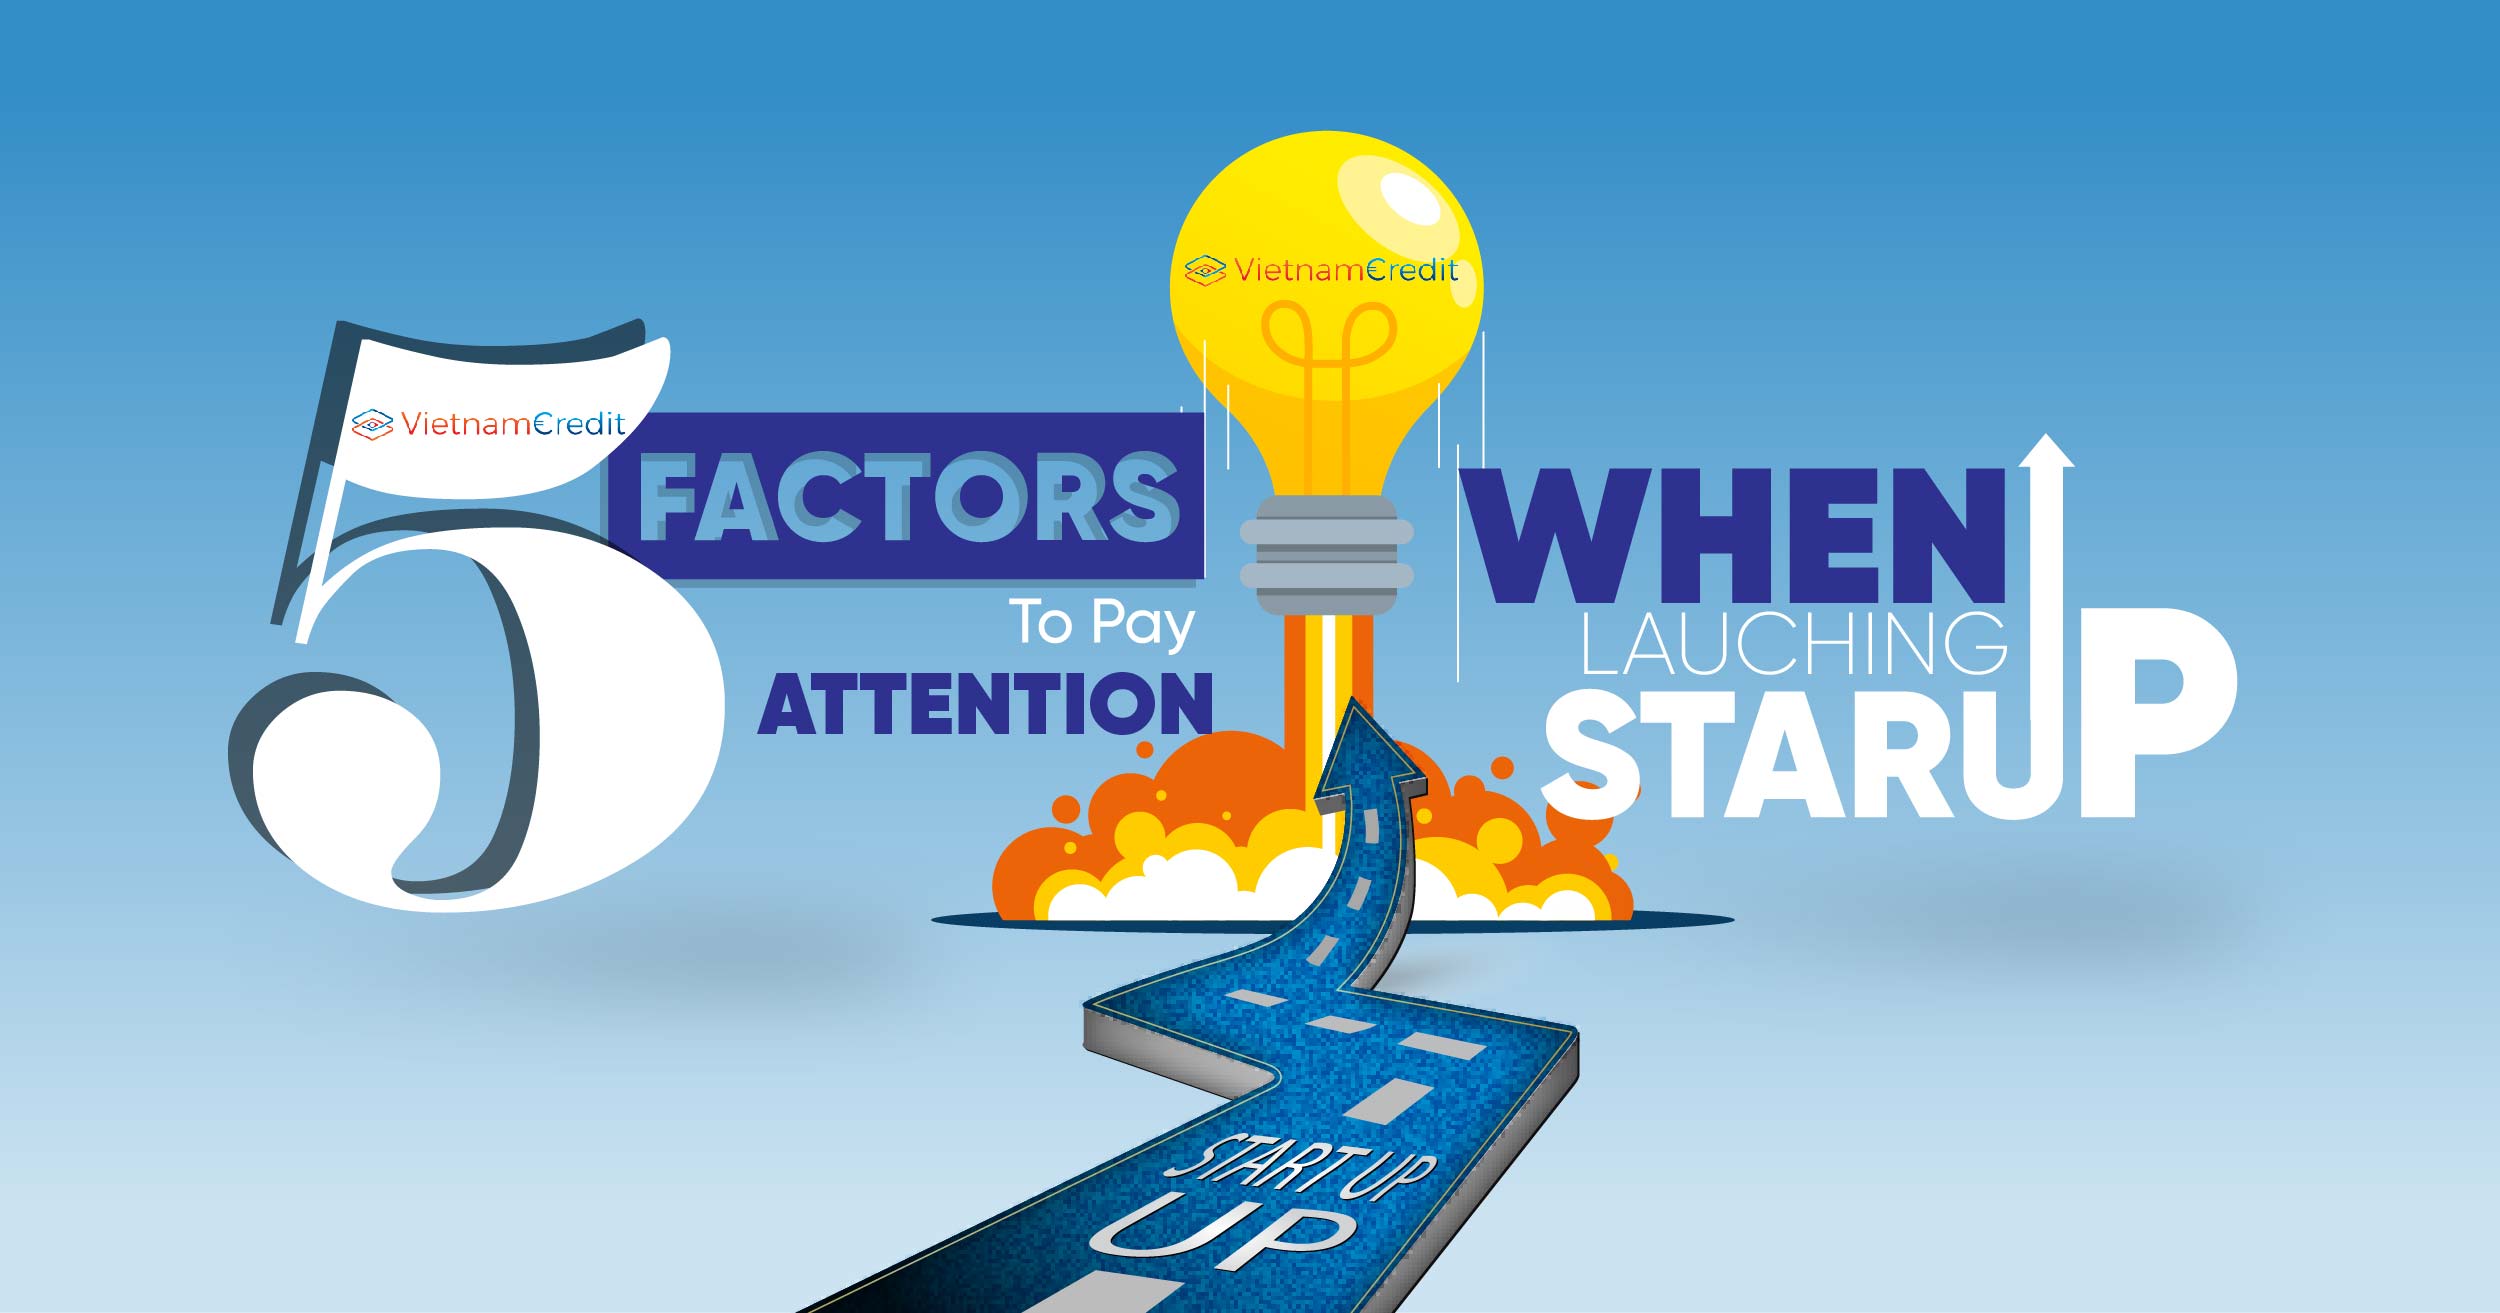 5 factors to pay attention to when launching a startup